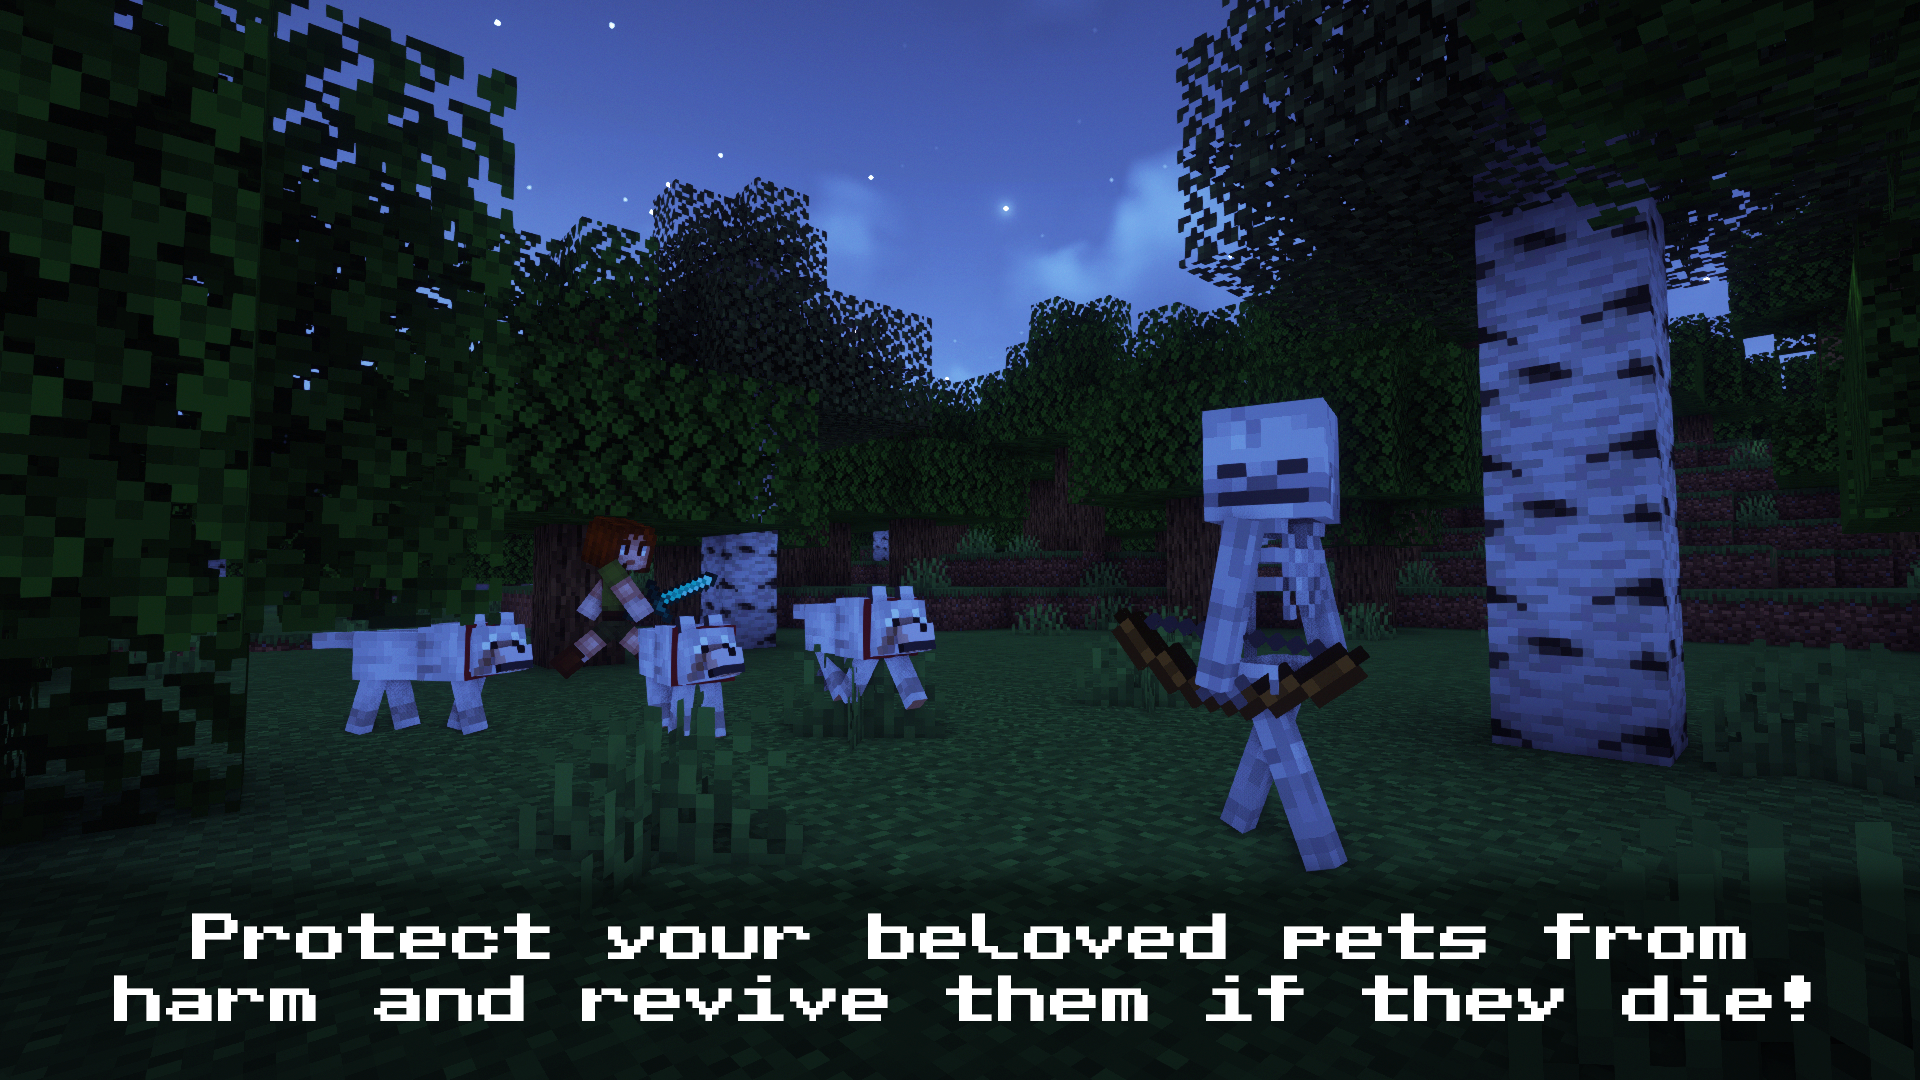 Three wolves and a player chase a skeleton in the forest at night. The image is captioned "Protect your beloved pets from harm and revive them if they die!